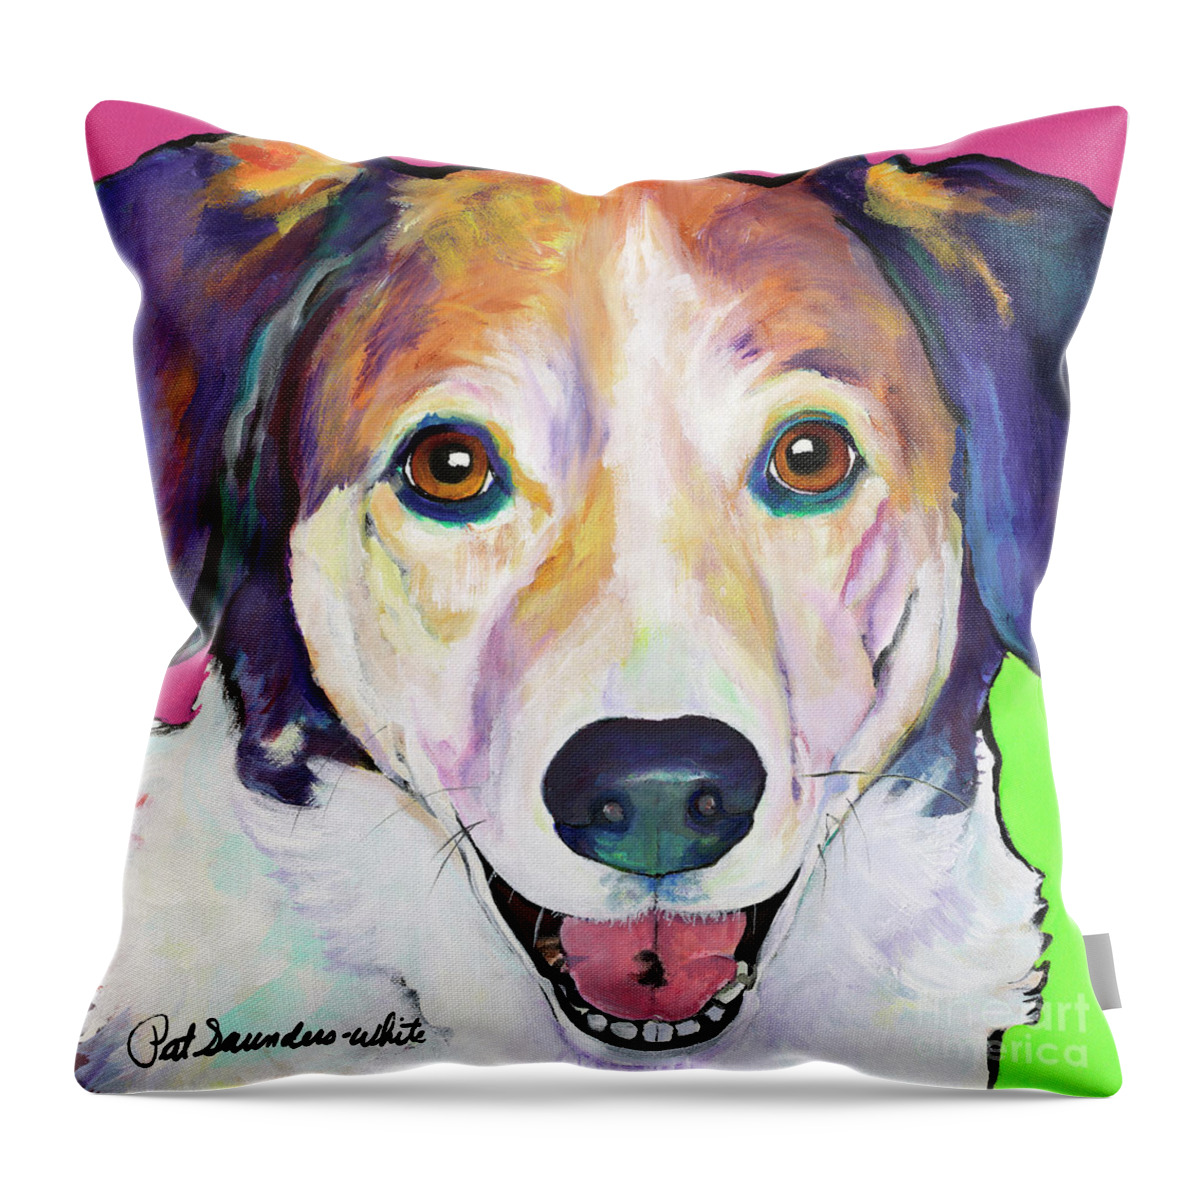 Smiling Dog Throw Pillow featuring the painting Murphy by Pat Saunders-White